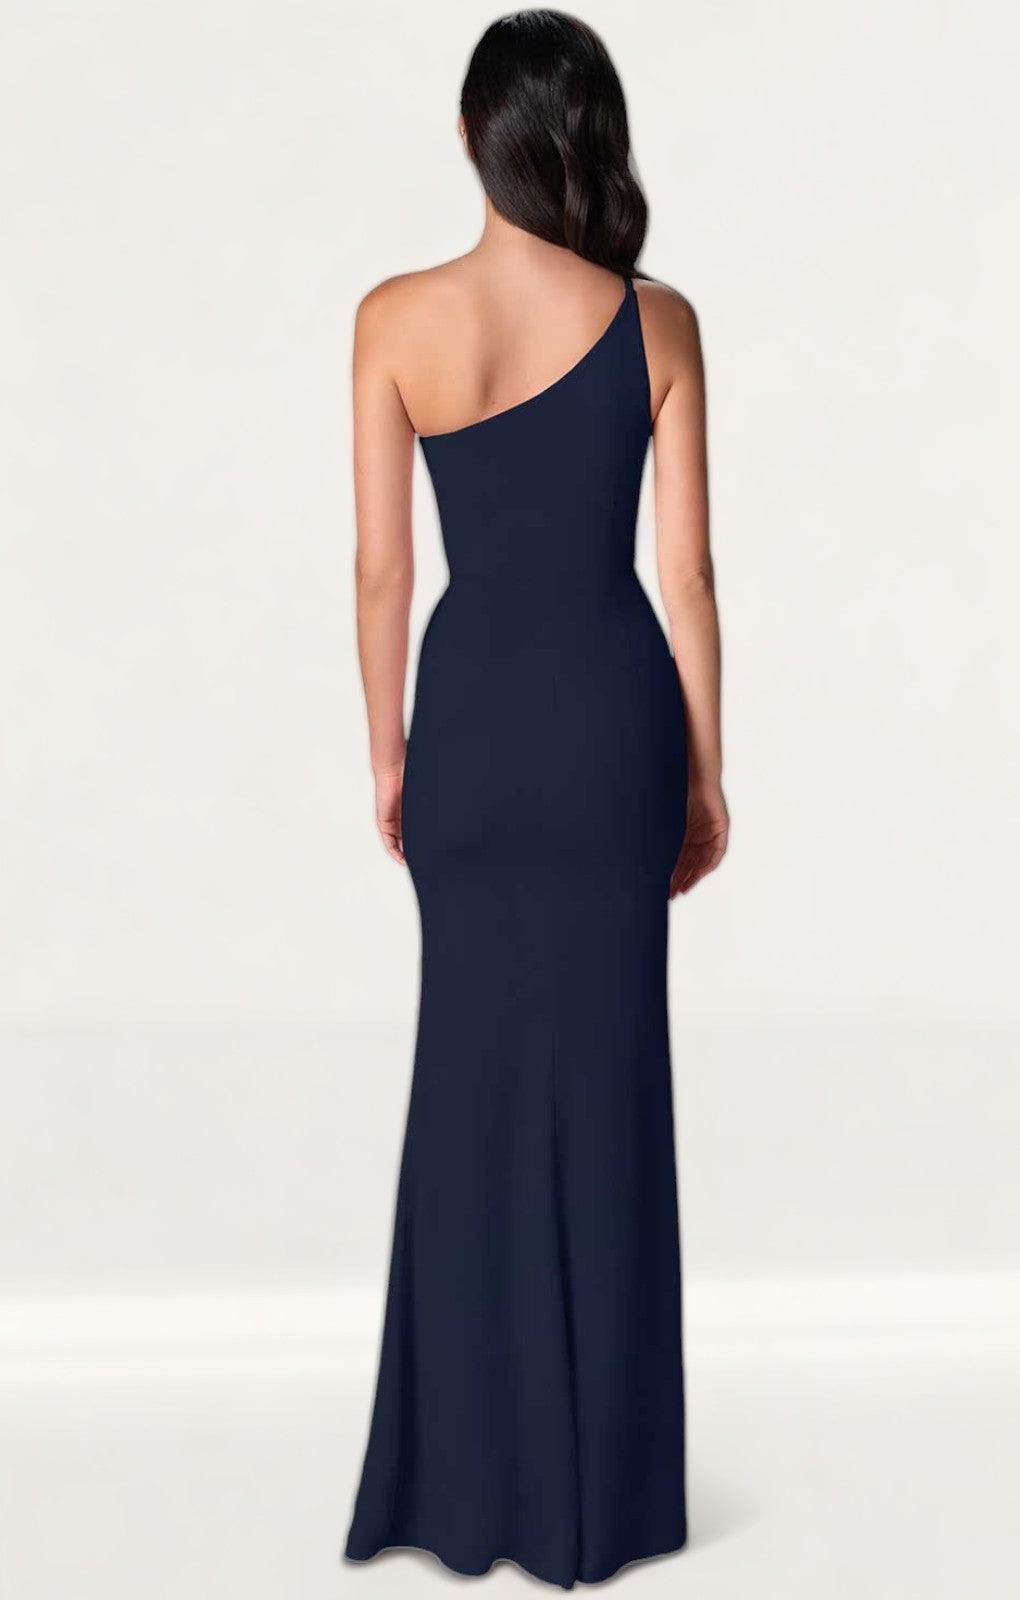 Dress The Population Amy Navy Maxi Dress product image